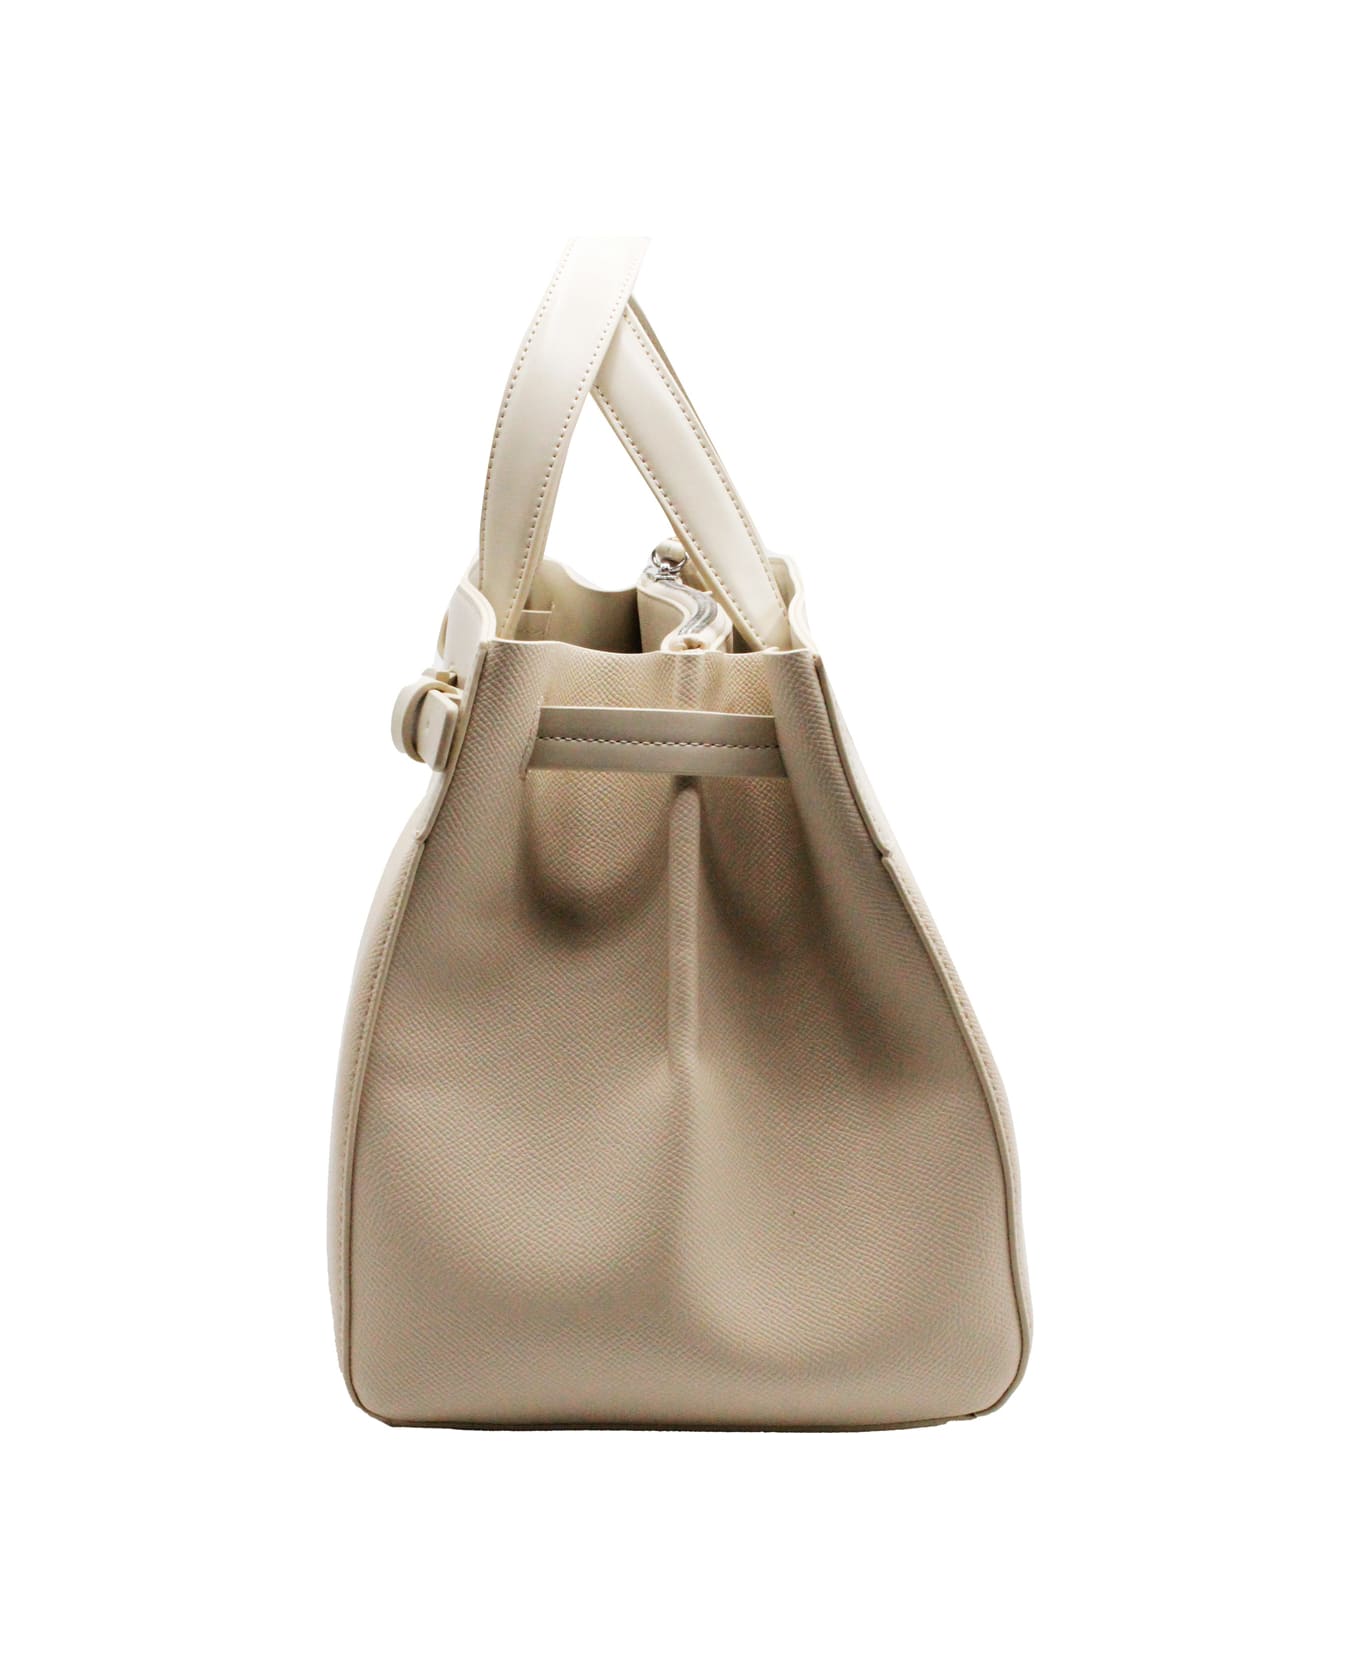 Armani Collezioni Eco Leather Shopping Bag With Double Compartment And Central Pocket Closed With Zip And Equipped With Shoulder Strap, Size 36x23x16 - Beige